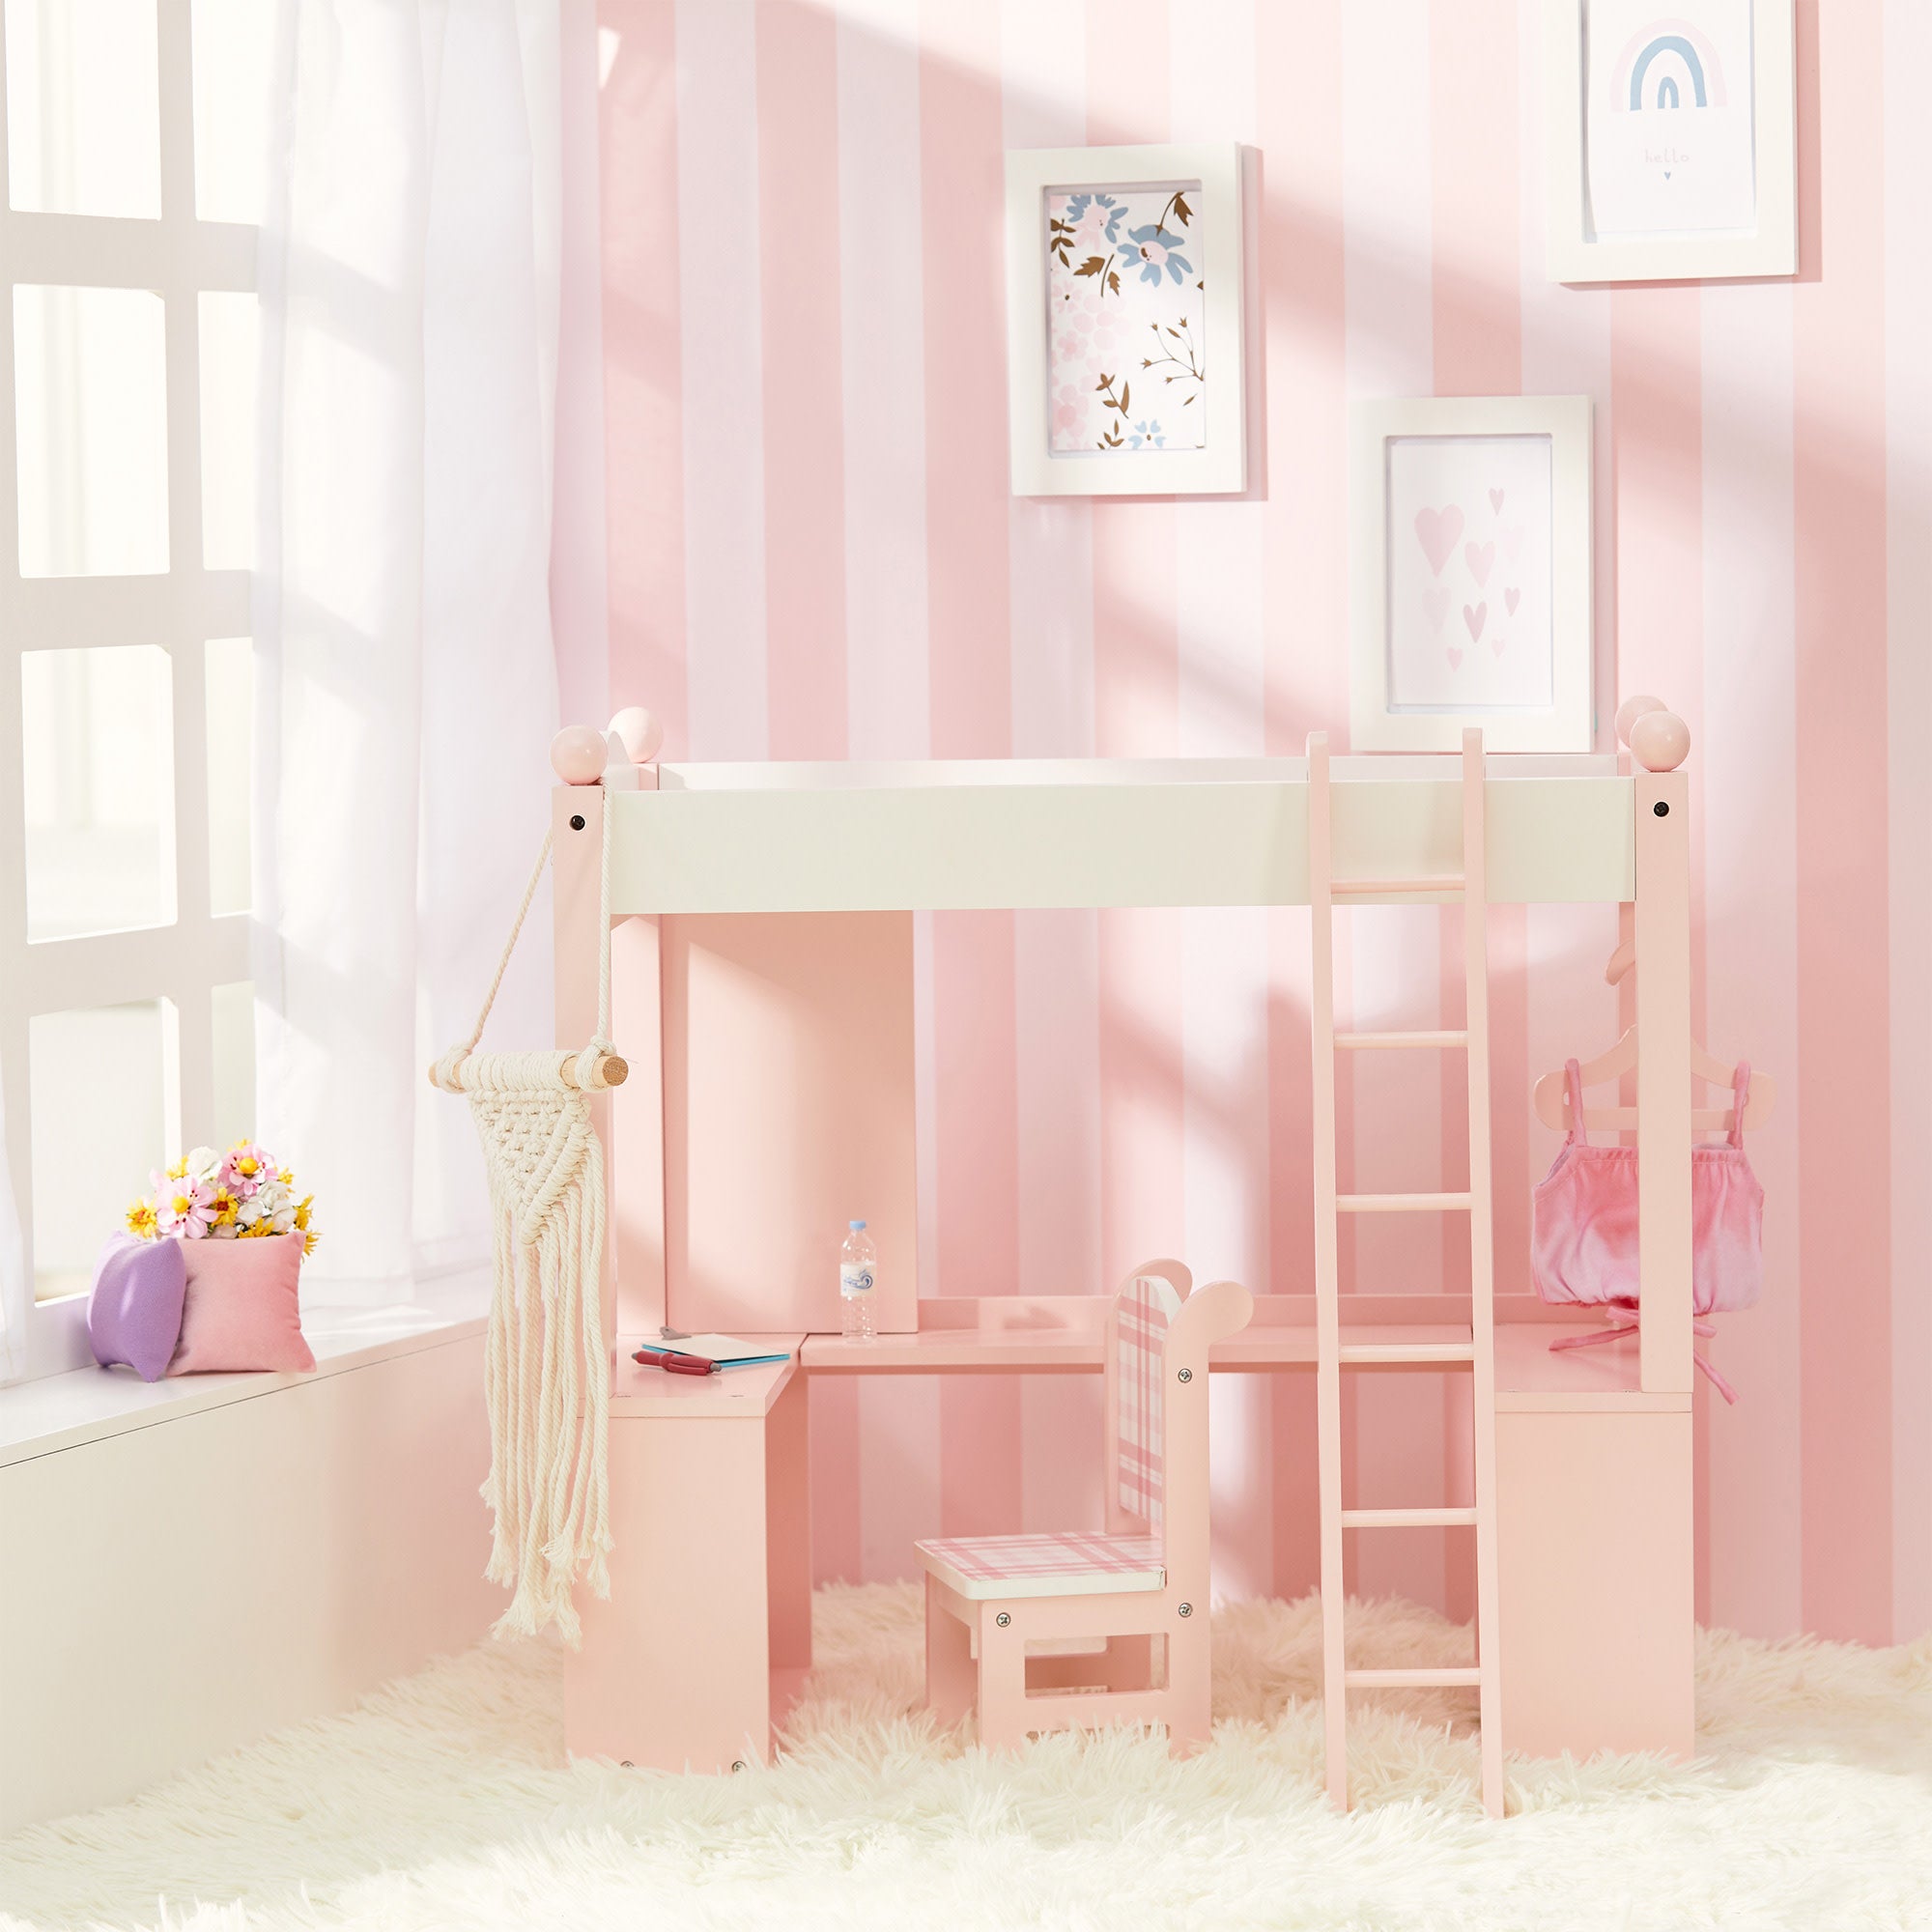 Sophia's by Teamson Kids Loft Bed, Desk, Chair, & Accessories for 18" Dolls, Pink